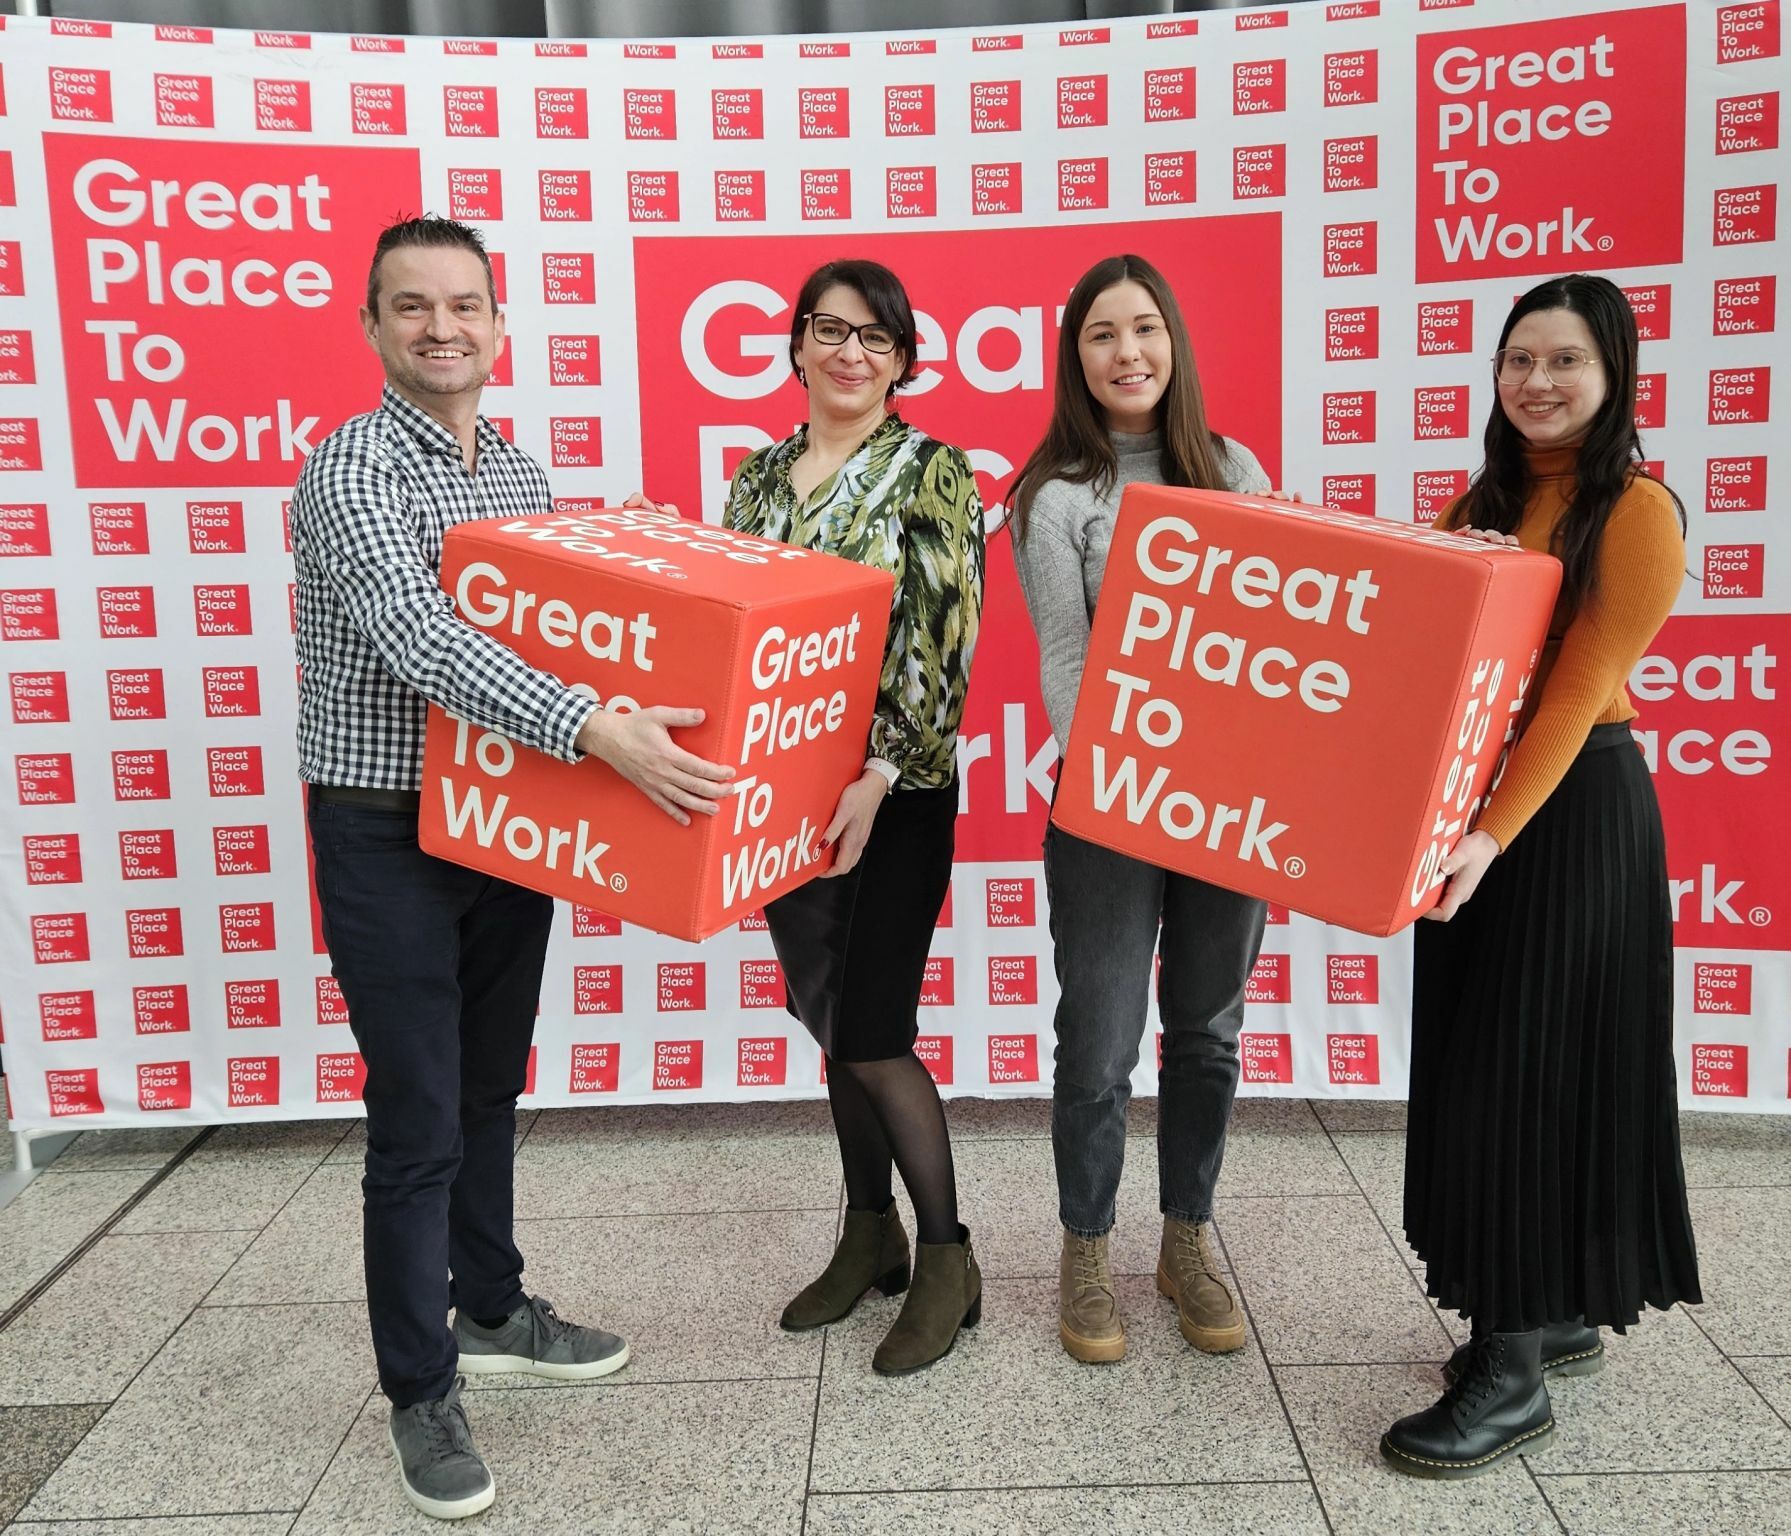 Aura Holohan Group Once Again Certified as a Great Place to Work